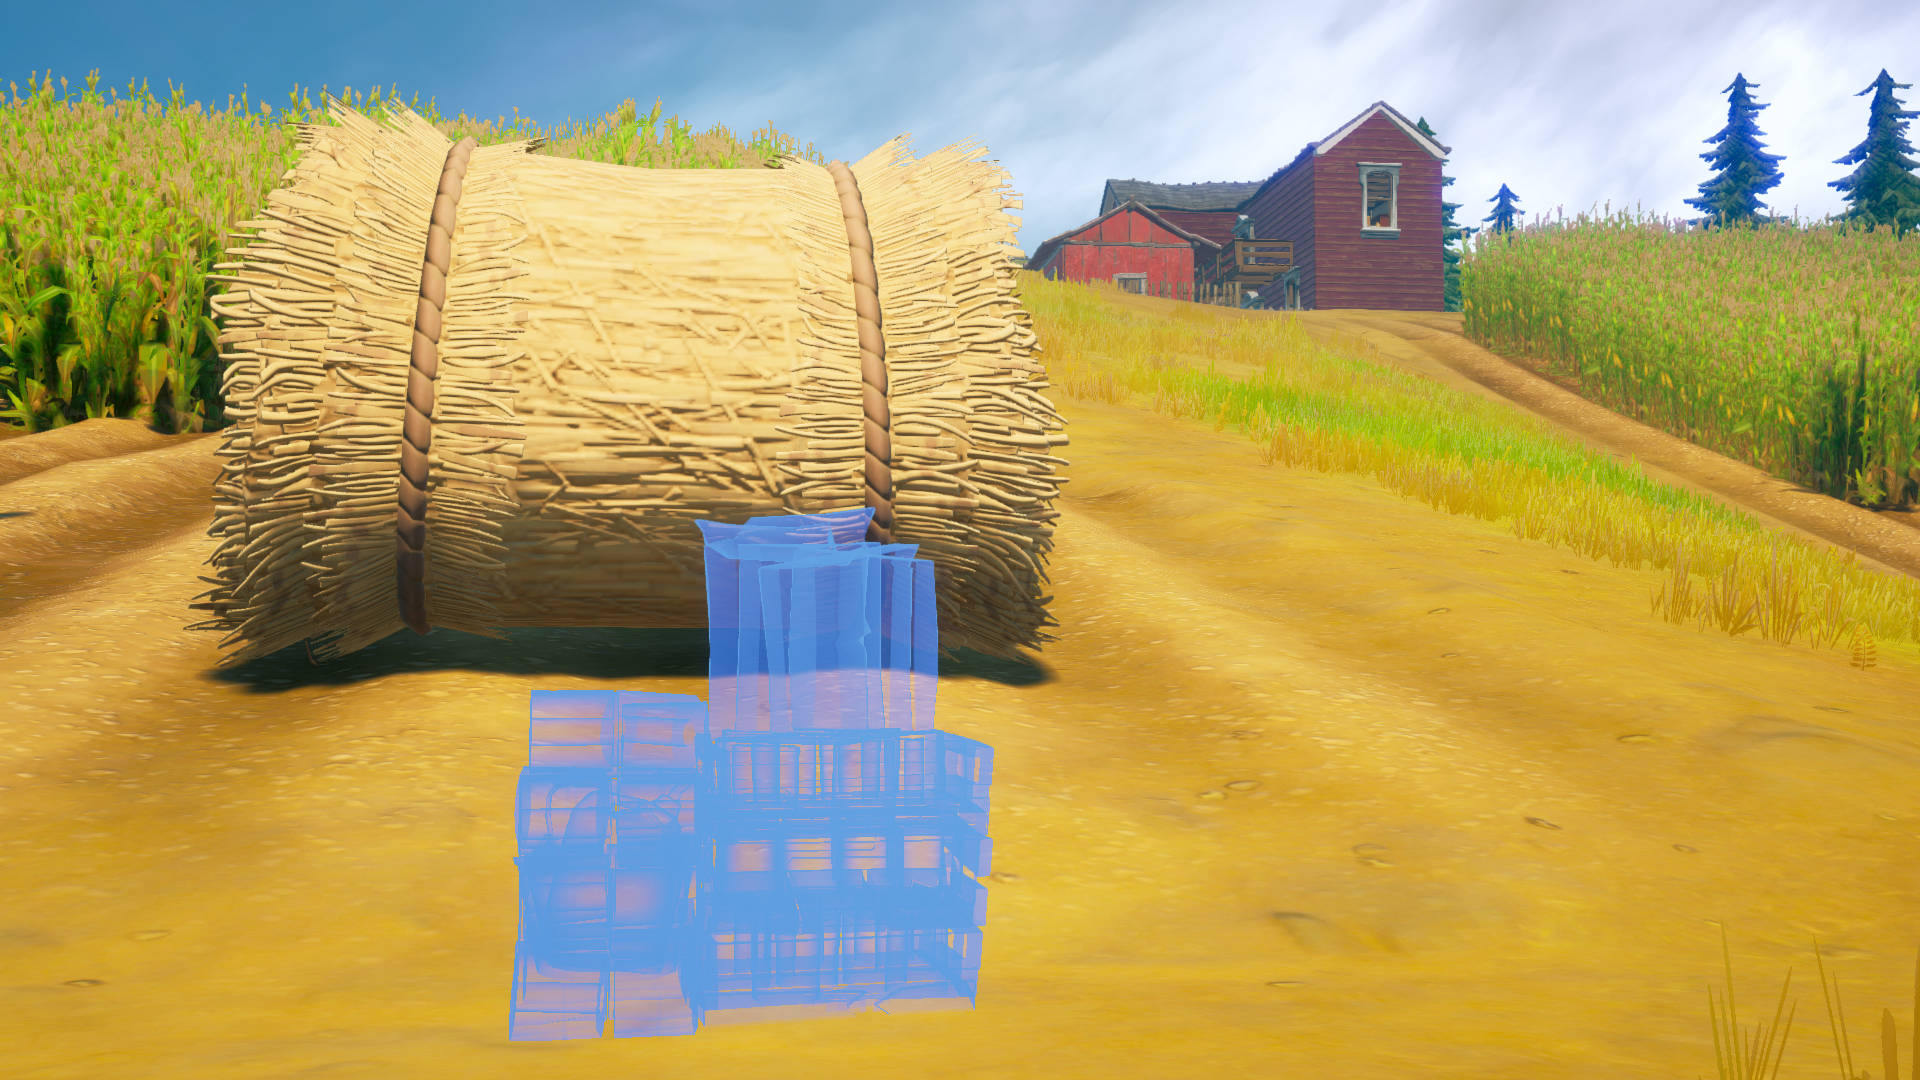 Where to place prepper supplies in Hayseed’s Farm in Fortnite